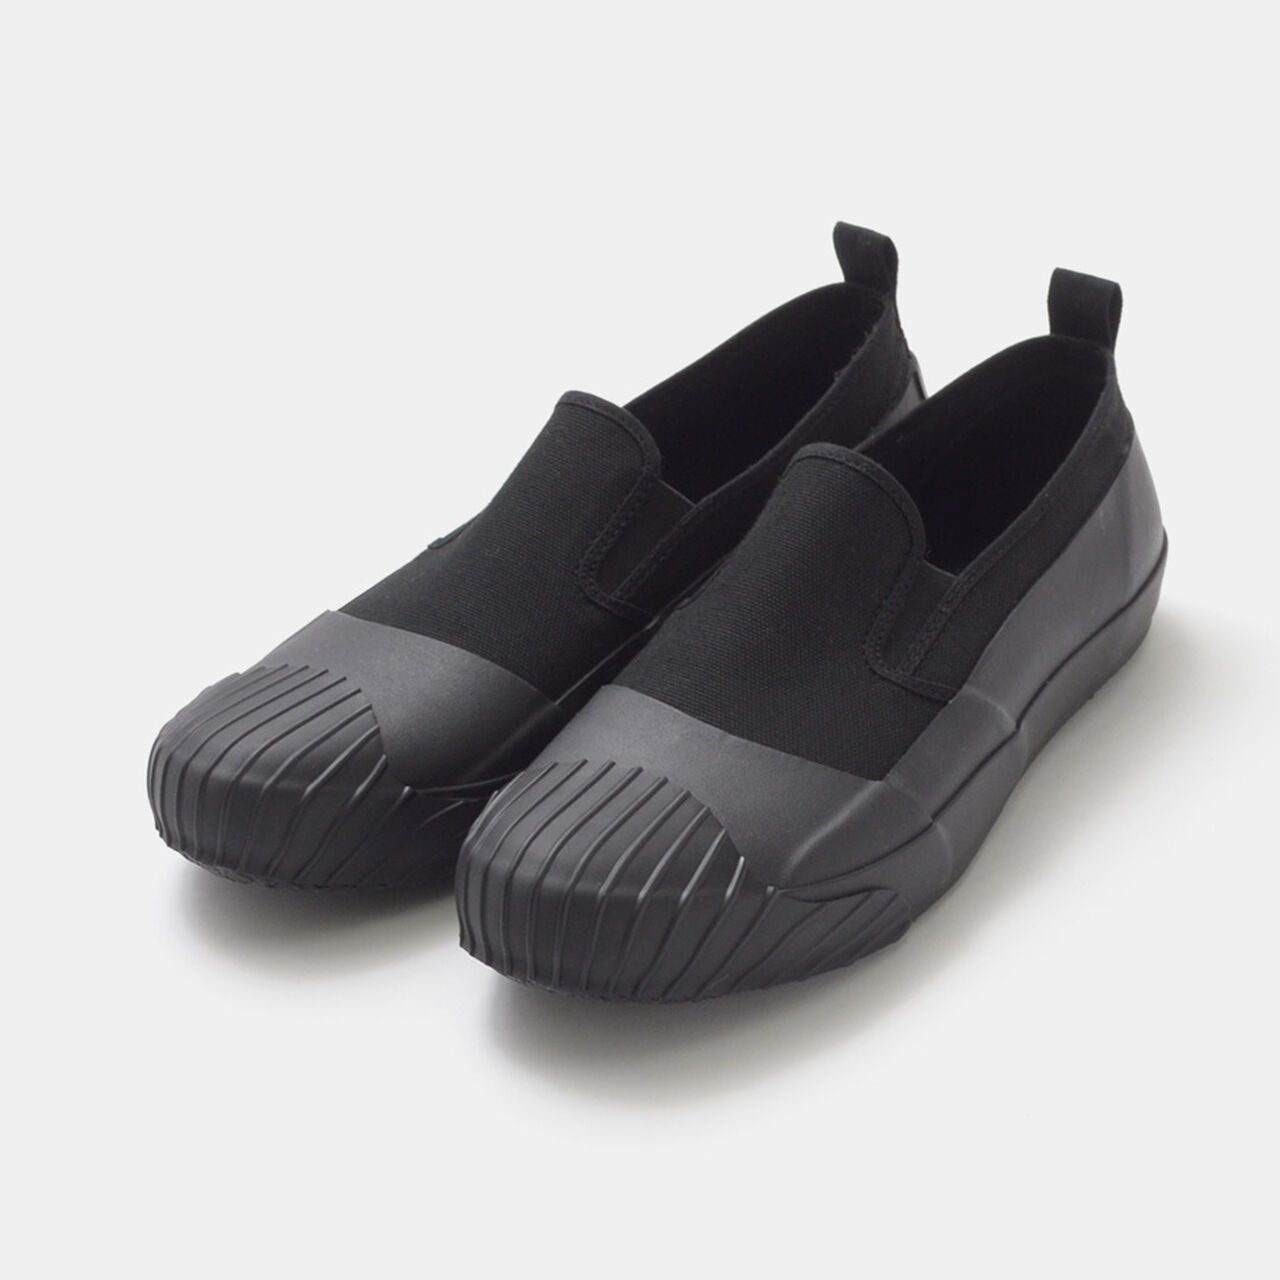 All Weather Slip-On Sneakers,Black, large image number 0